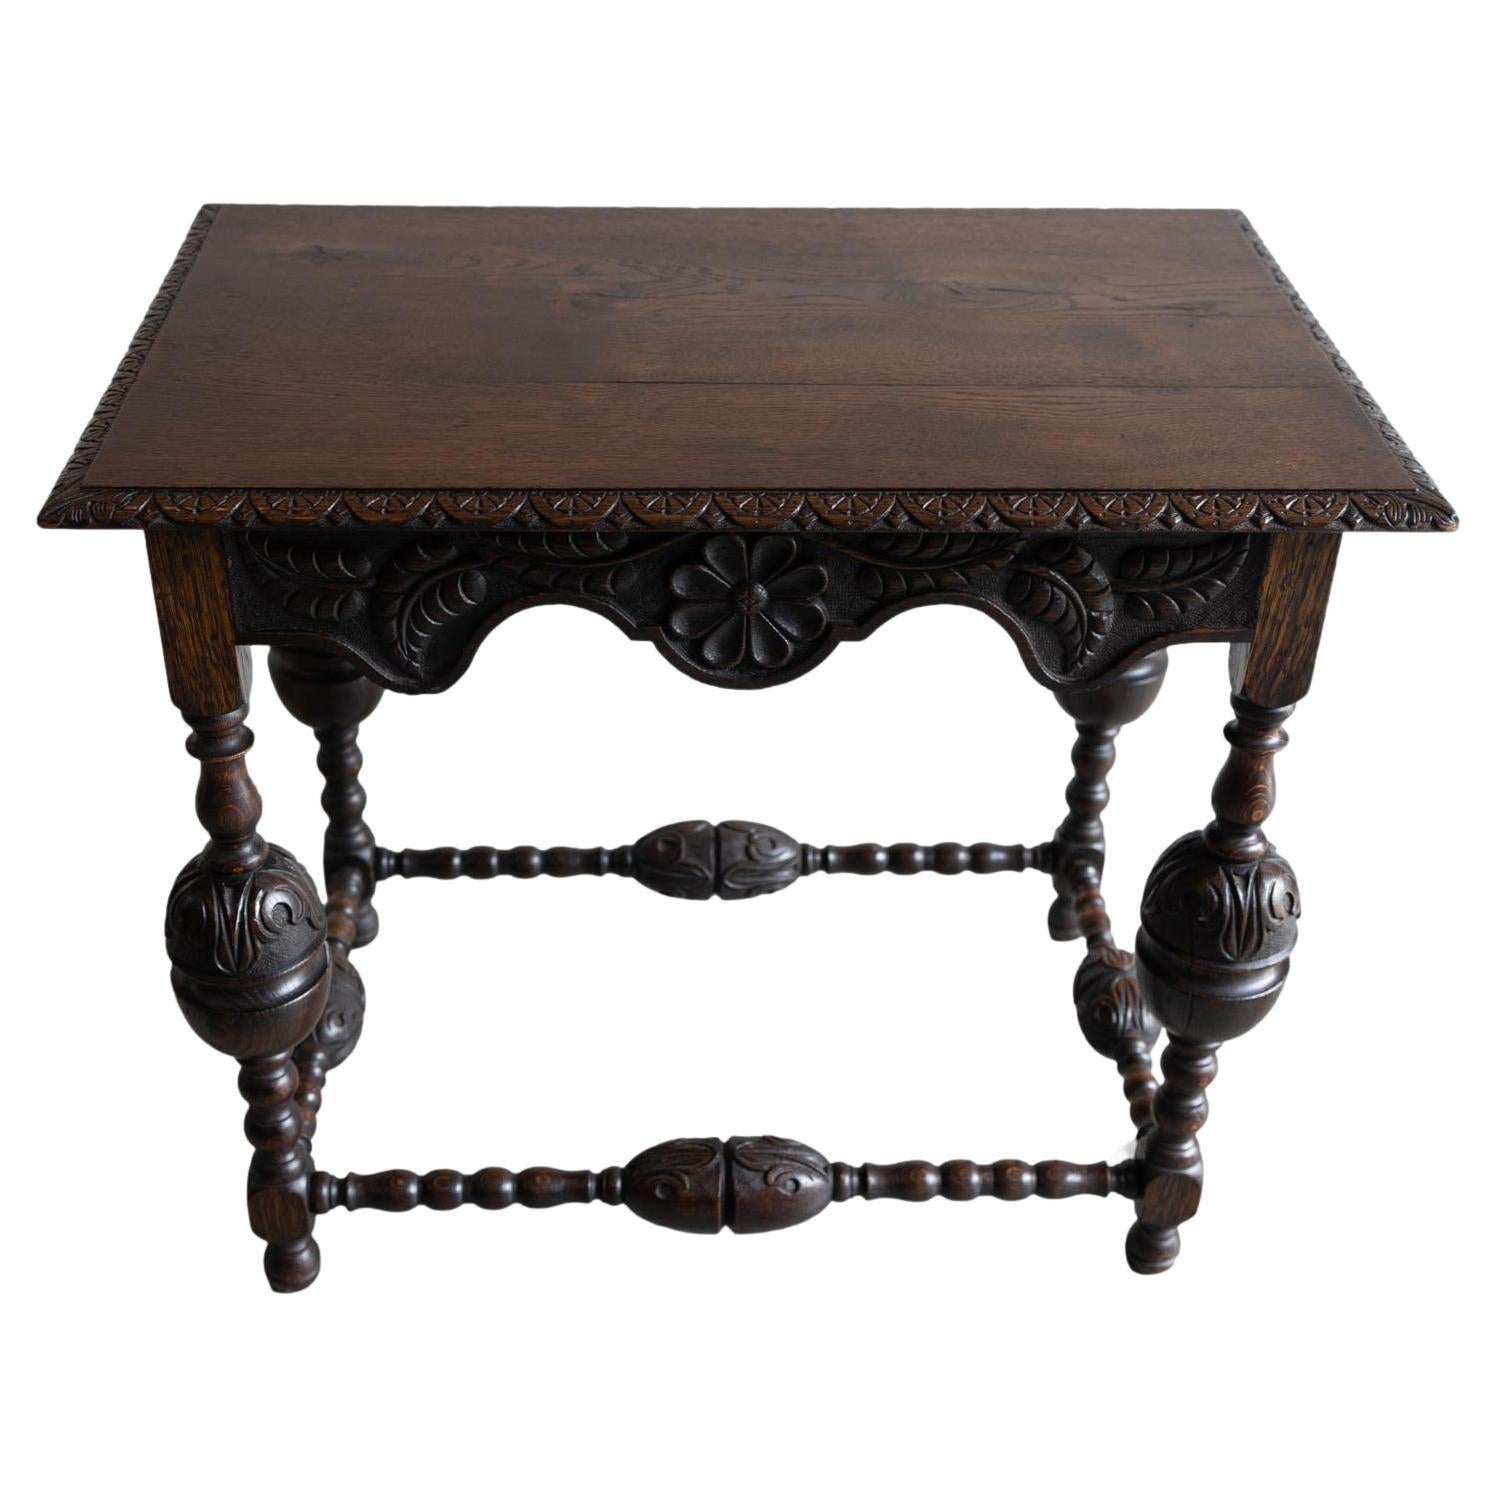 A Tudor-Style Carved Oak Center Table with Daisy Medallions, English, ca. 1880 For Sale